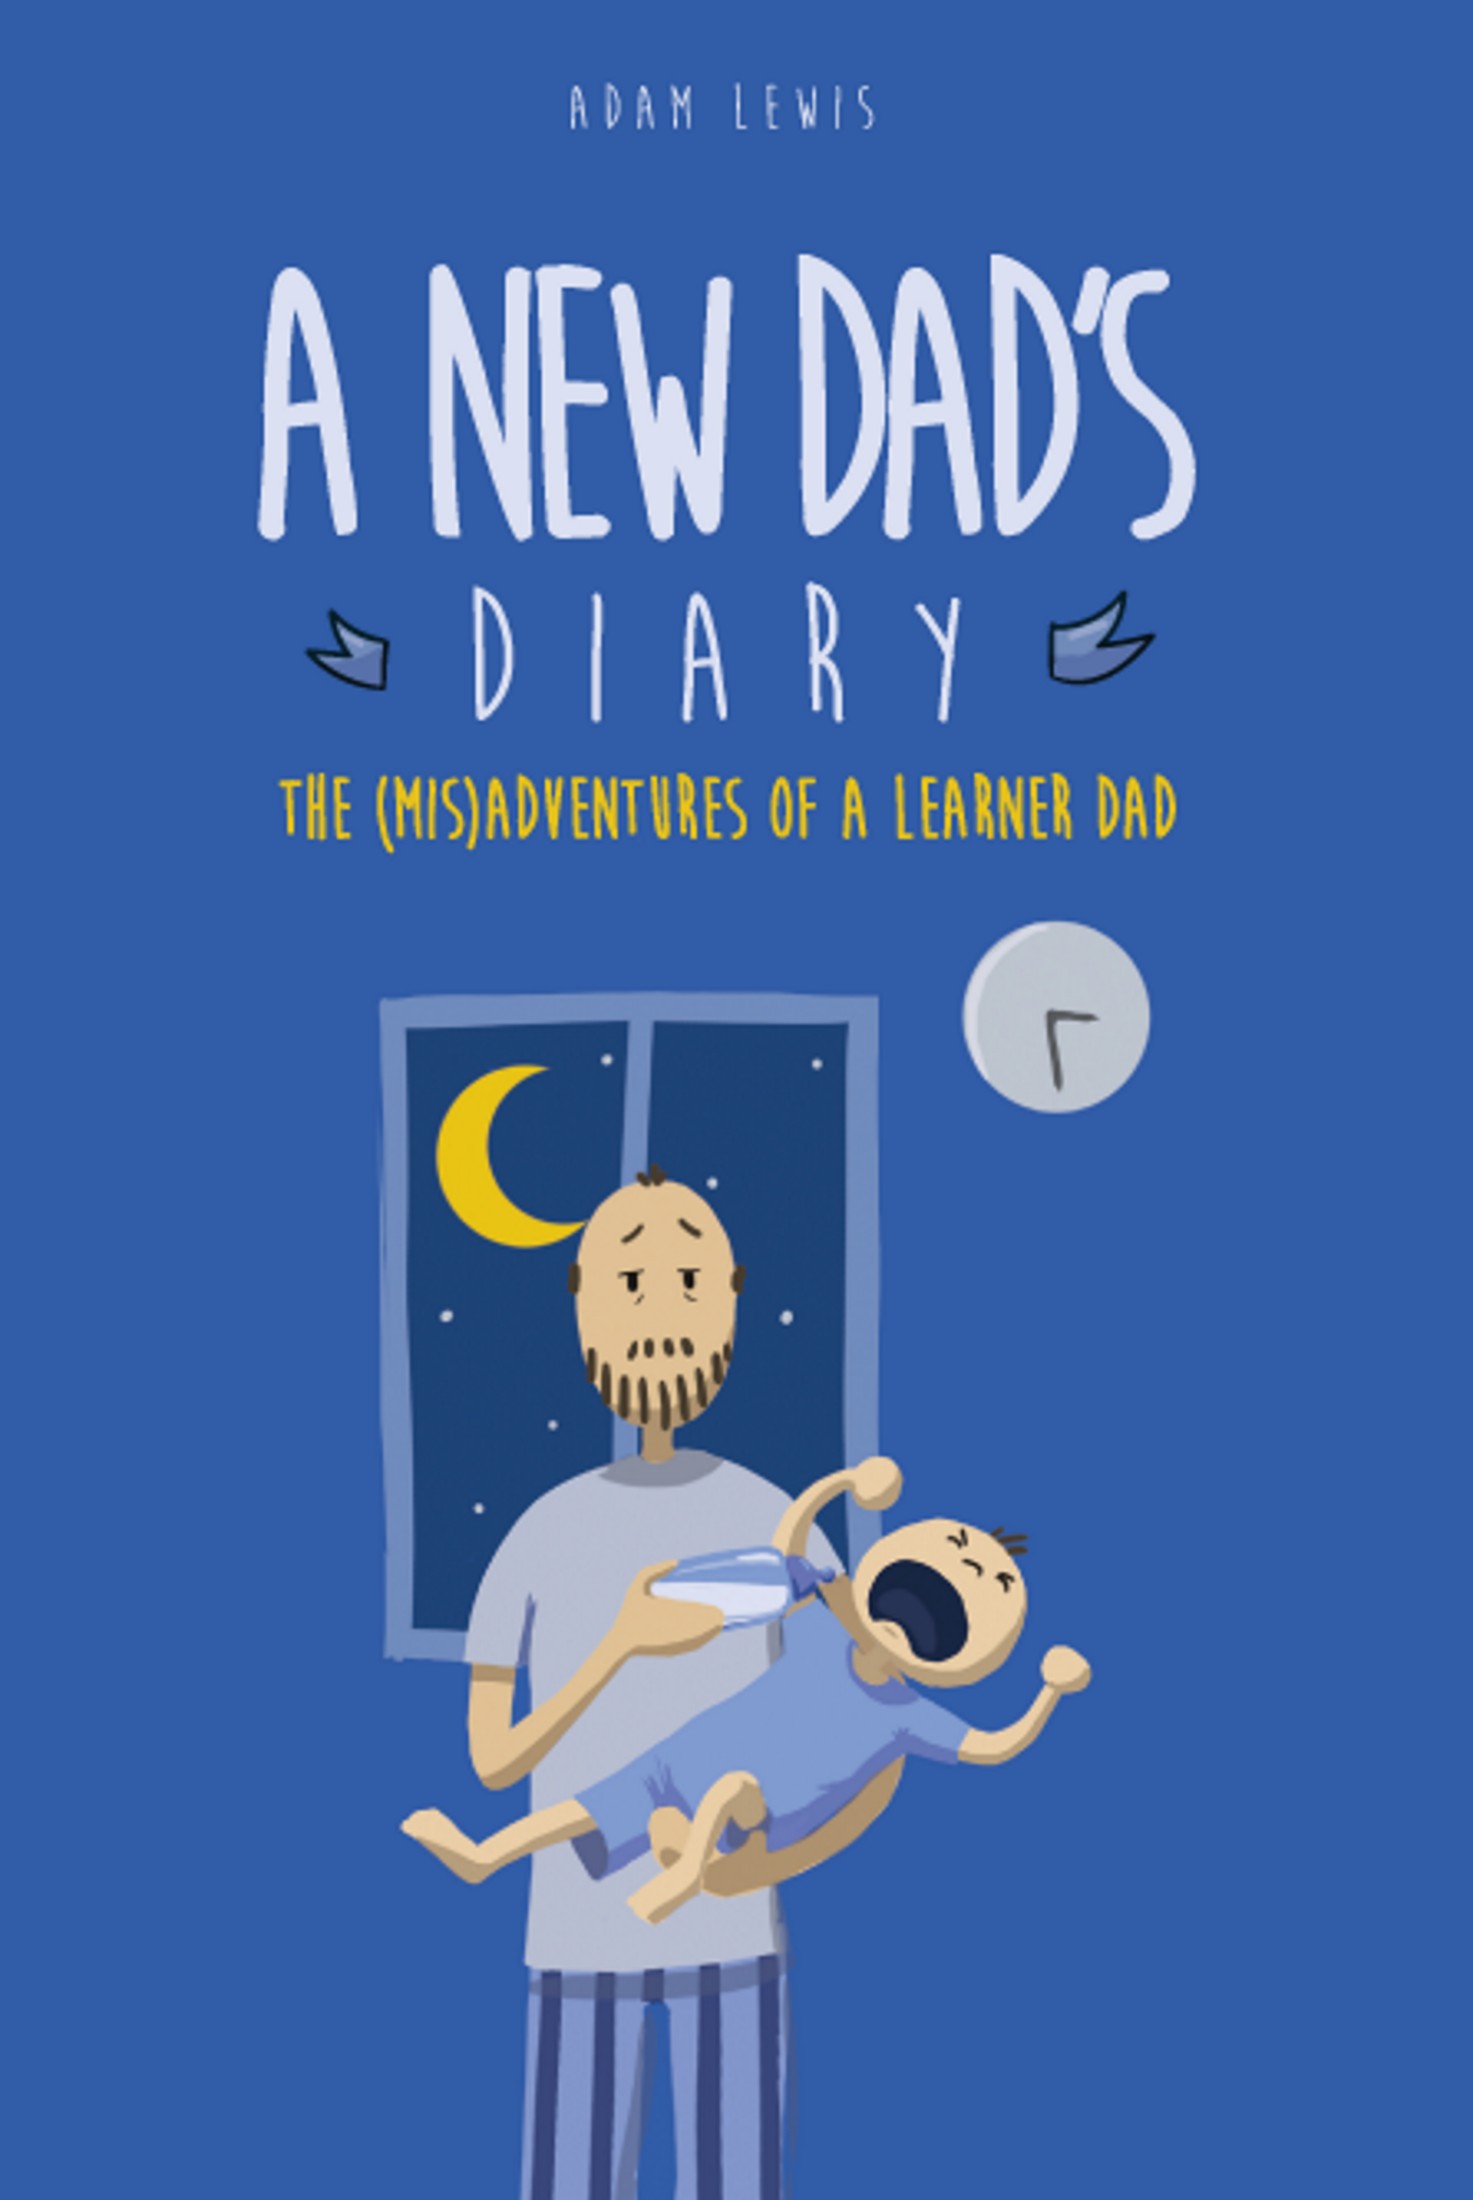 FREE: A New Dad’s Diary by Adam Lewis